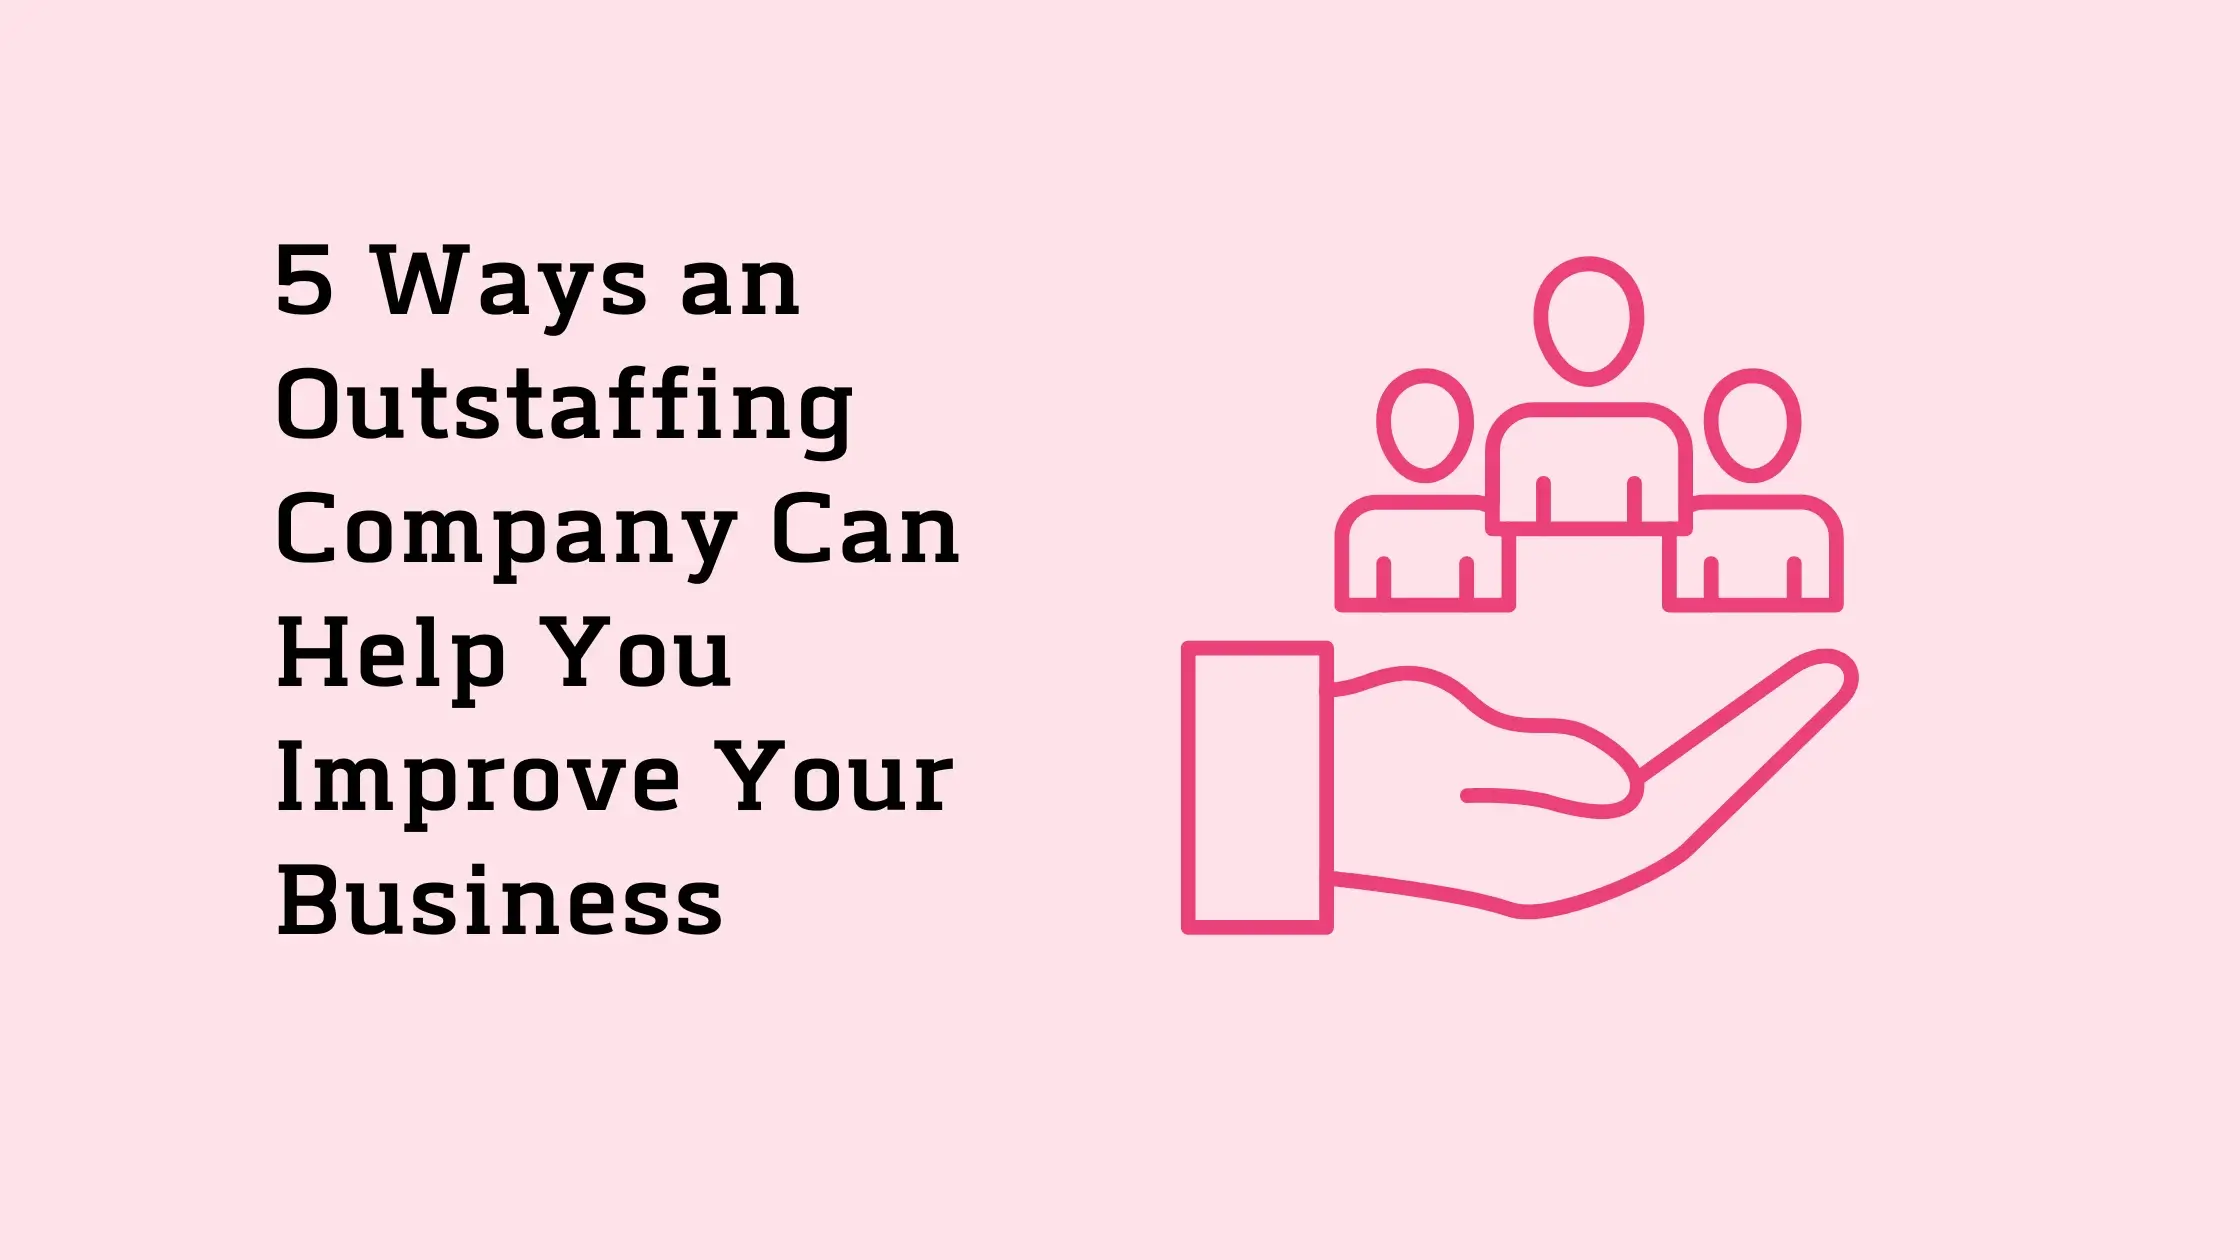 5-Ways-an-Outstaffing-Company-Can-Help-You-Improve-Your-Business